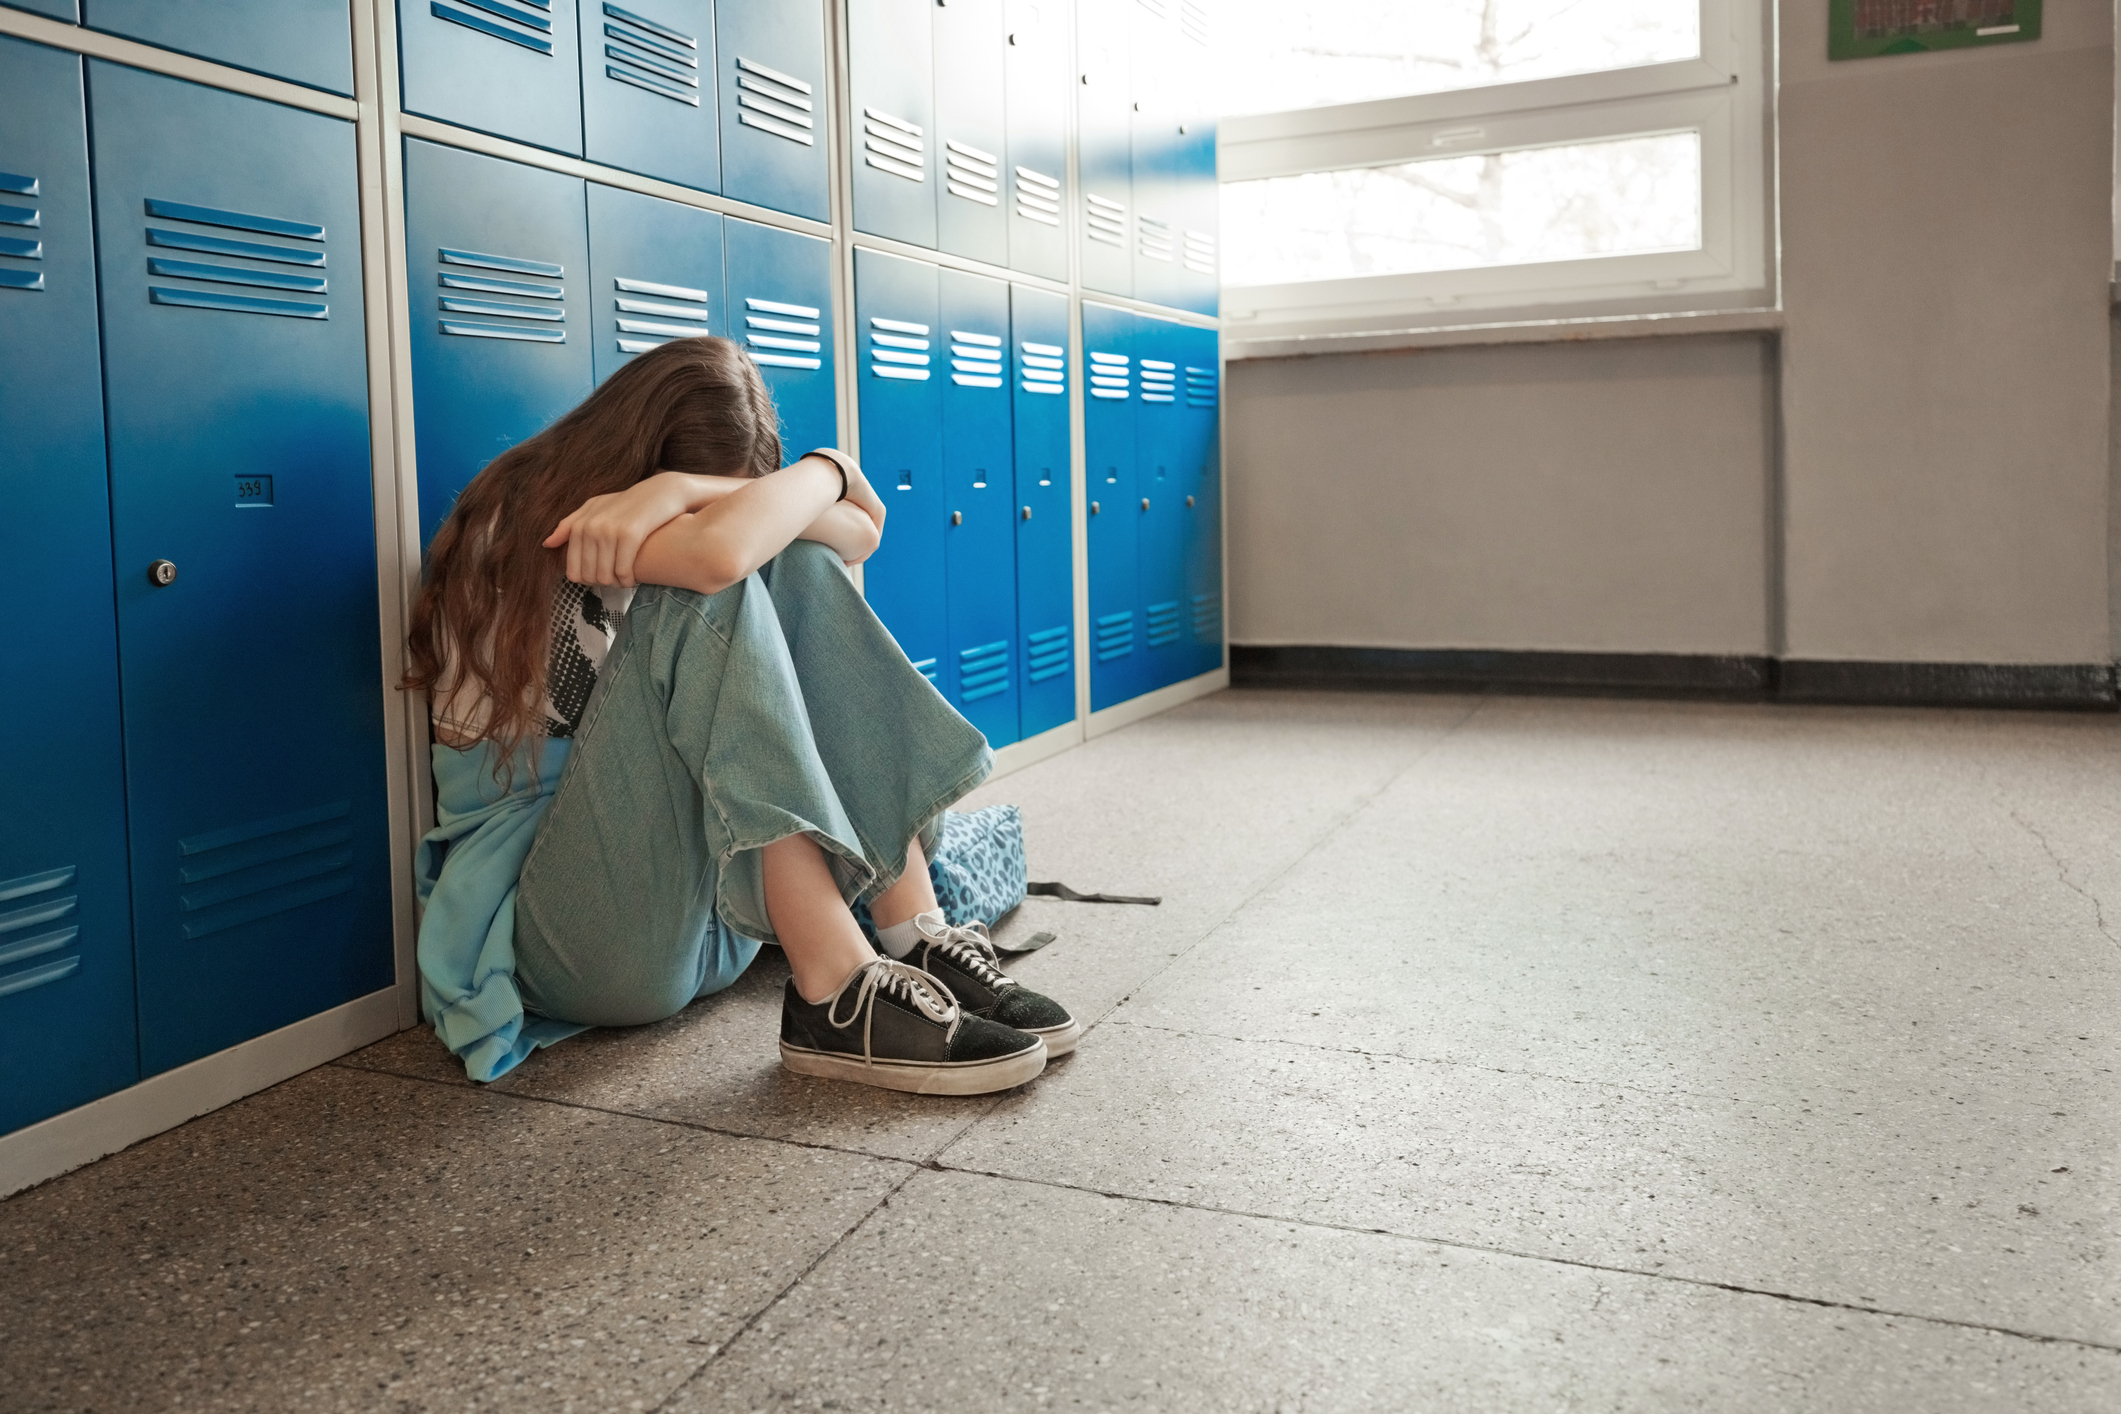 Person sitting on floor by lockers, head resting on knees, seeming distressed or fatigued